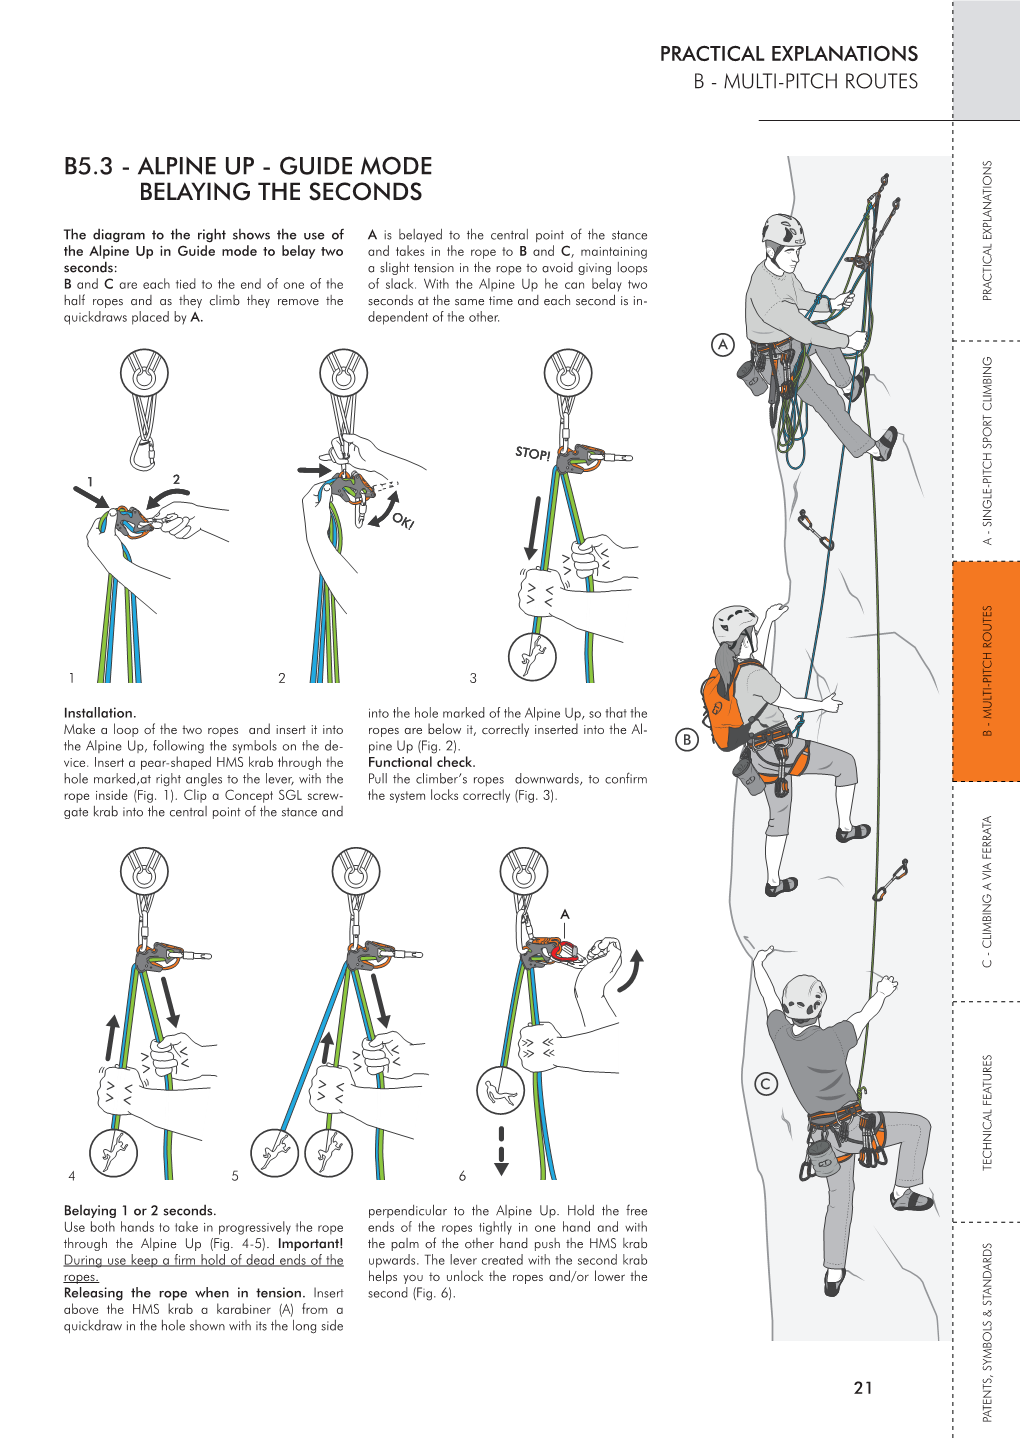 Alpine up - Guide Mode Belaying the Seconds